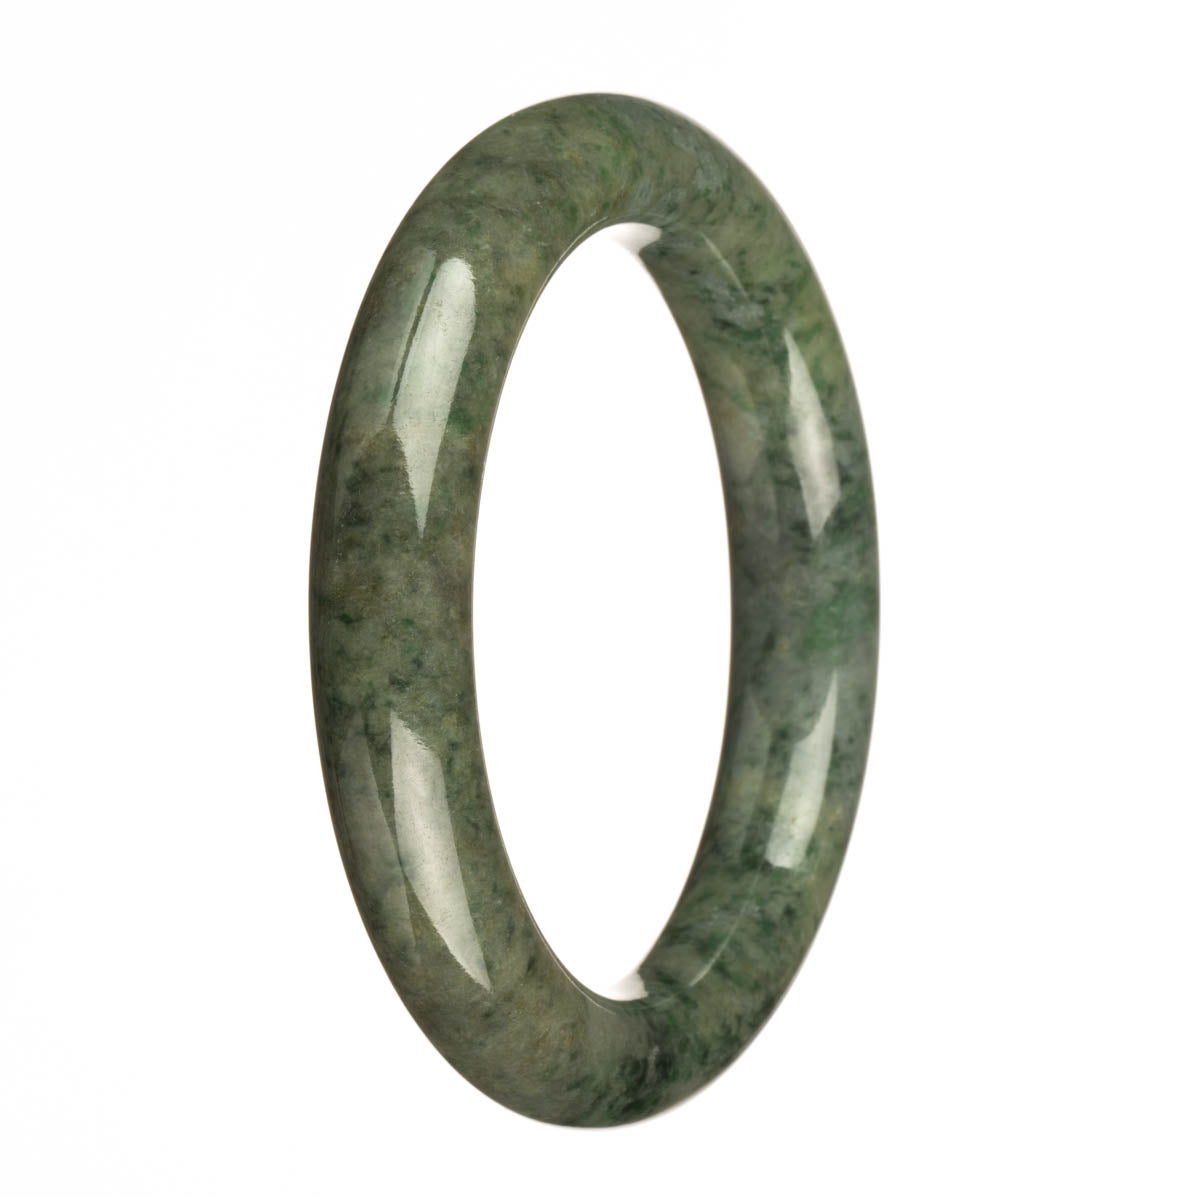 A close-up image of a petite round jade bangle bracelet in dark green with apple green patterns. This bracelet has been certified as untreated and is made of jadeite jade. It has a diameter of 61mm.